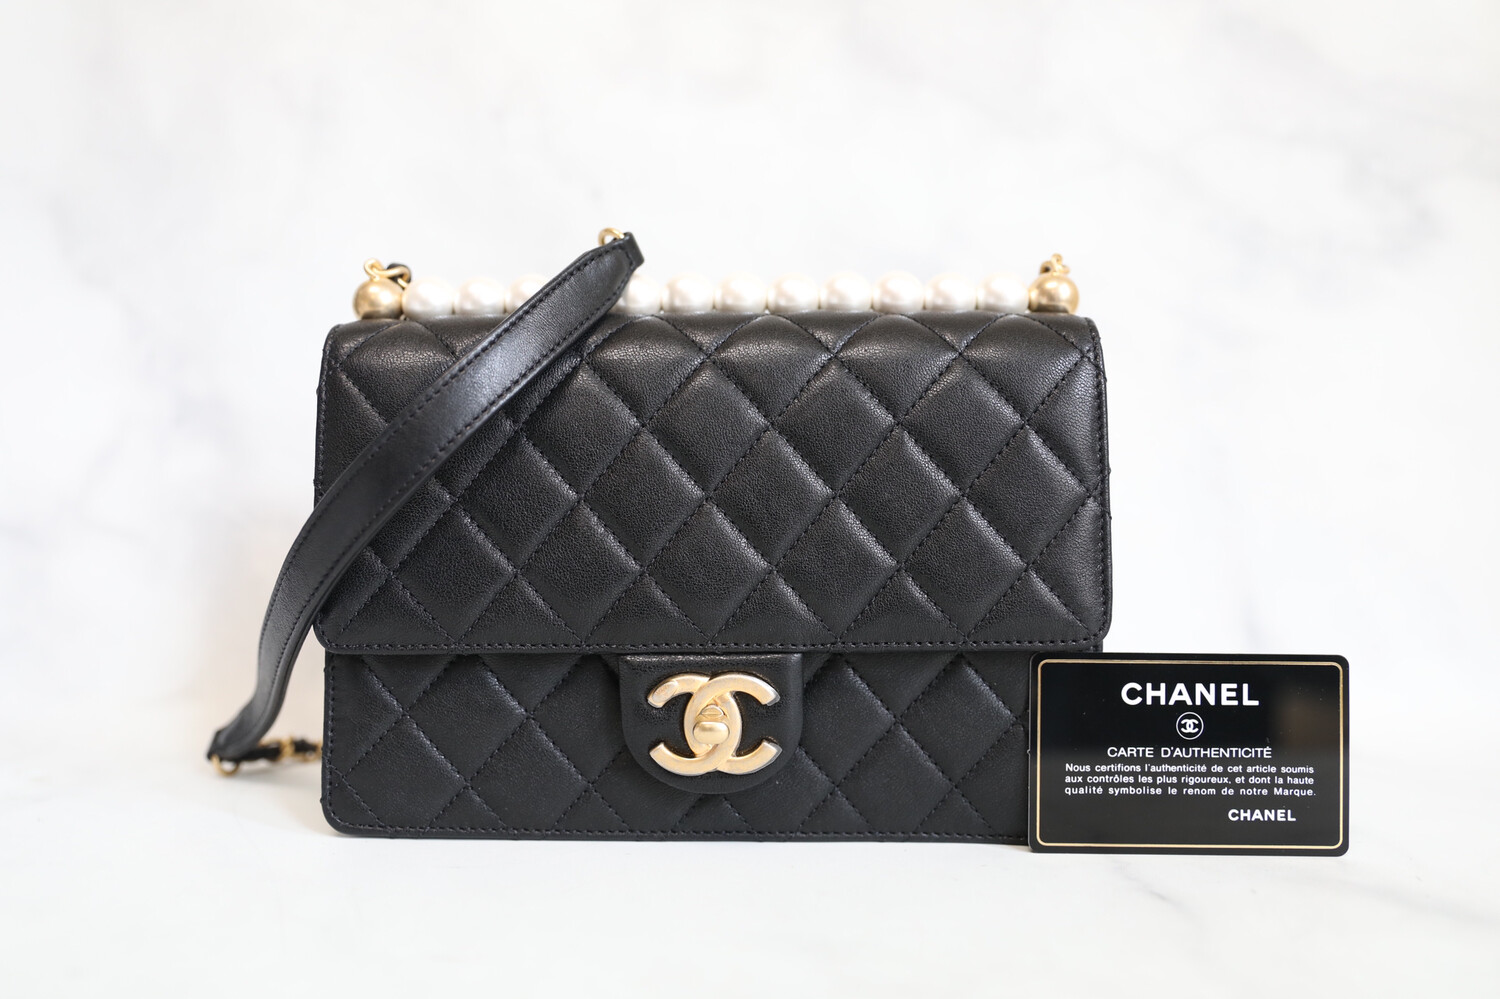 CHANEL Pre-Owned About Pearls mini bag, Black